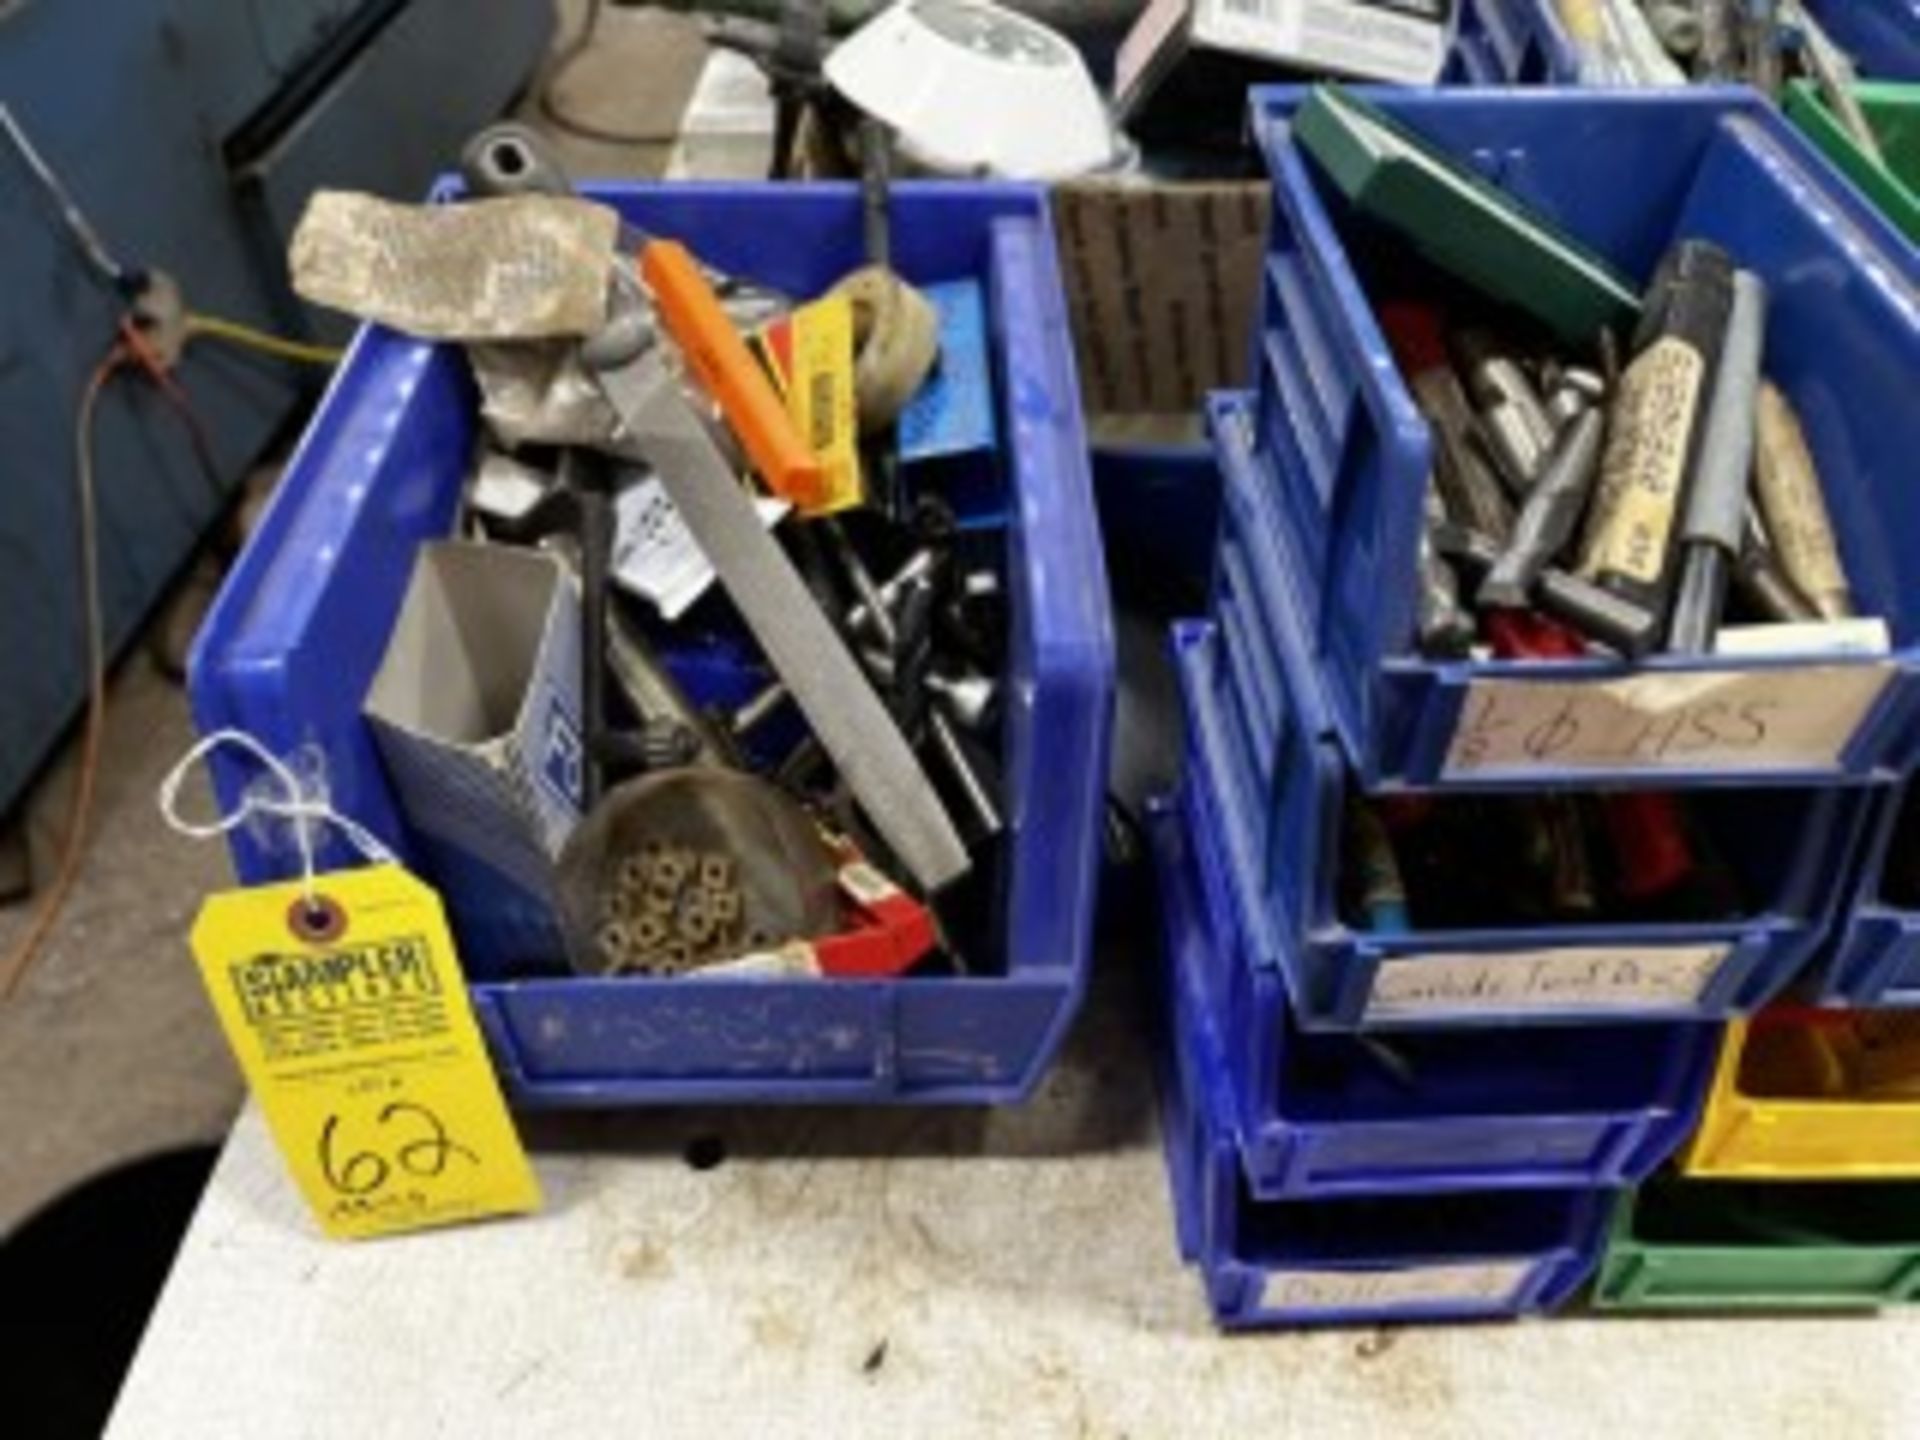 BINS ASSORTED TOOLS, GAGES, DRILL BITS, INSERTS, ETC